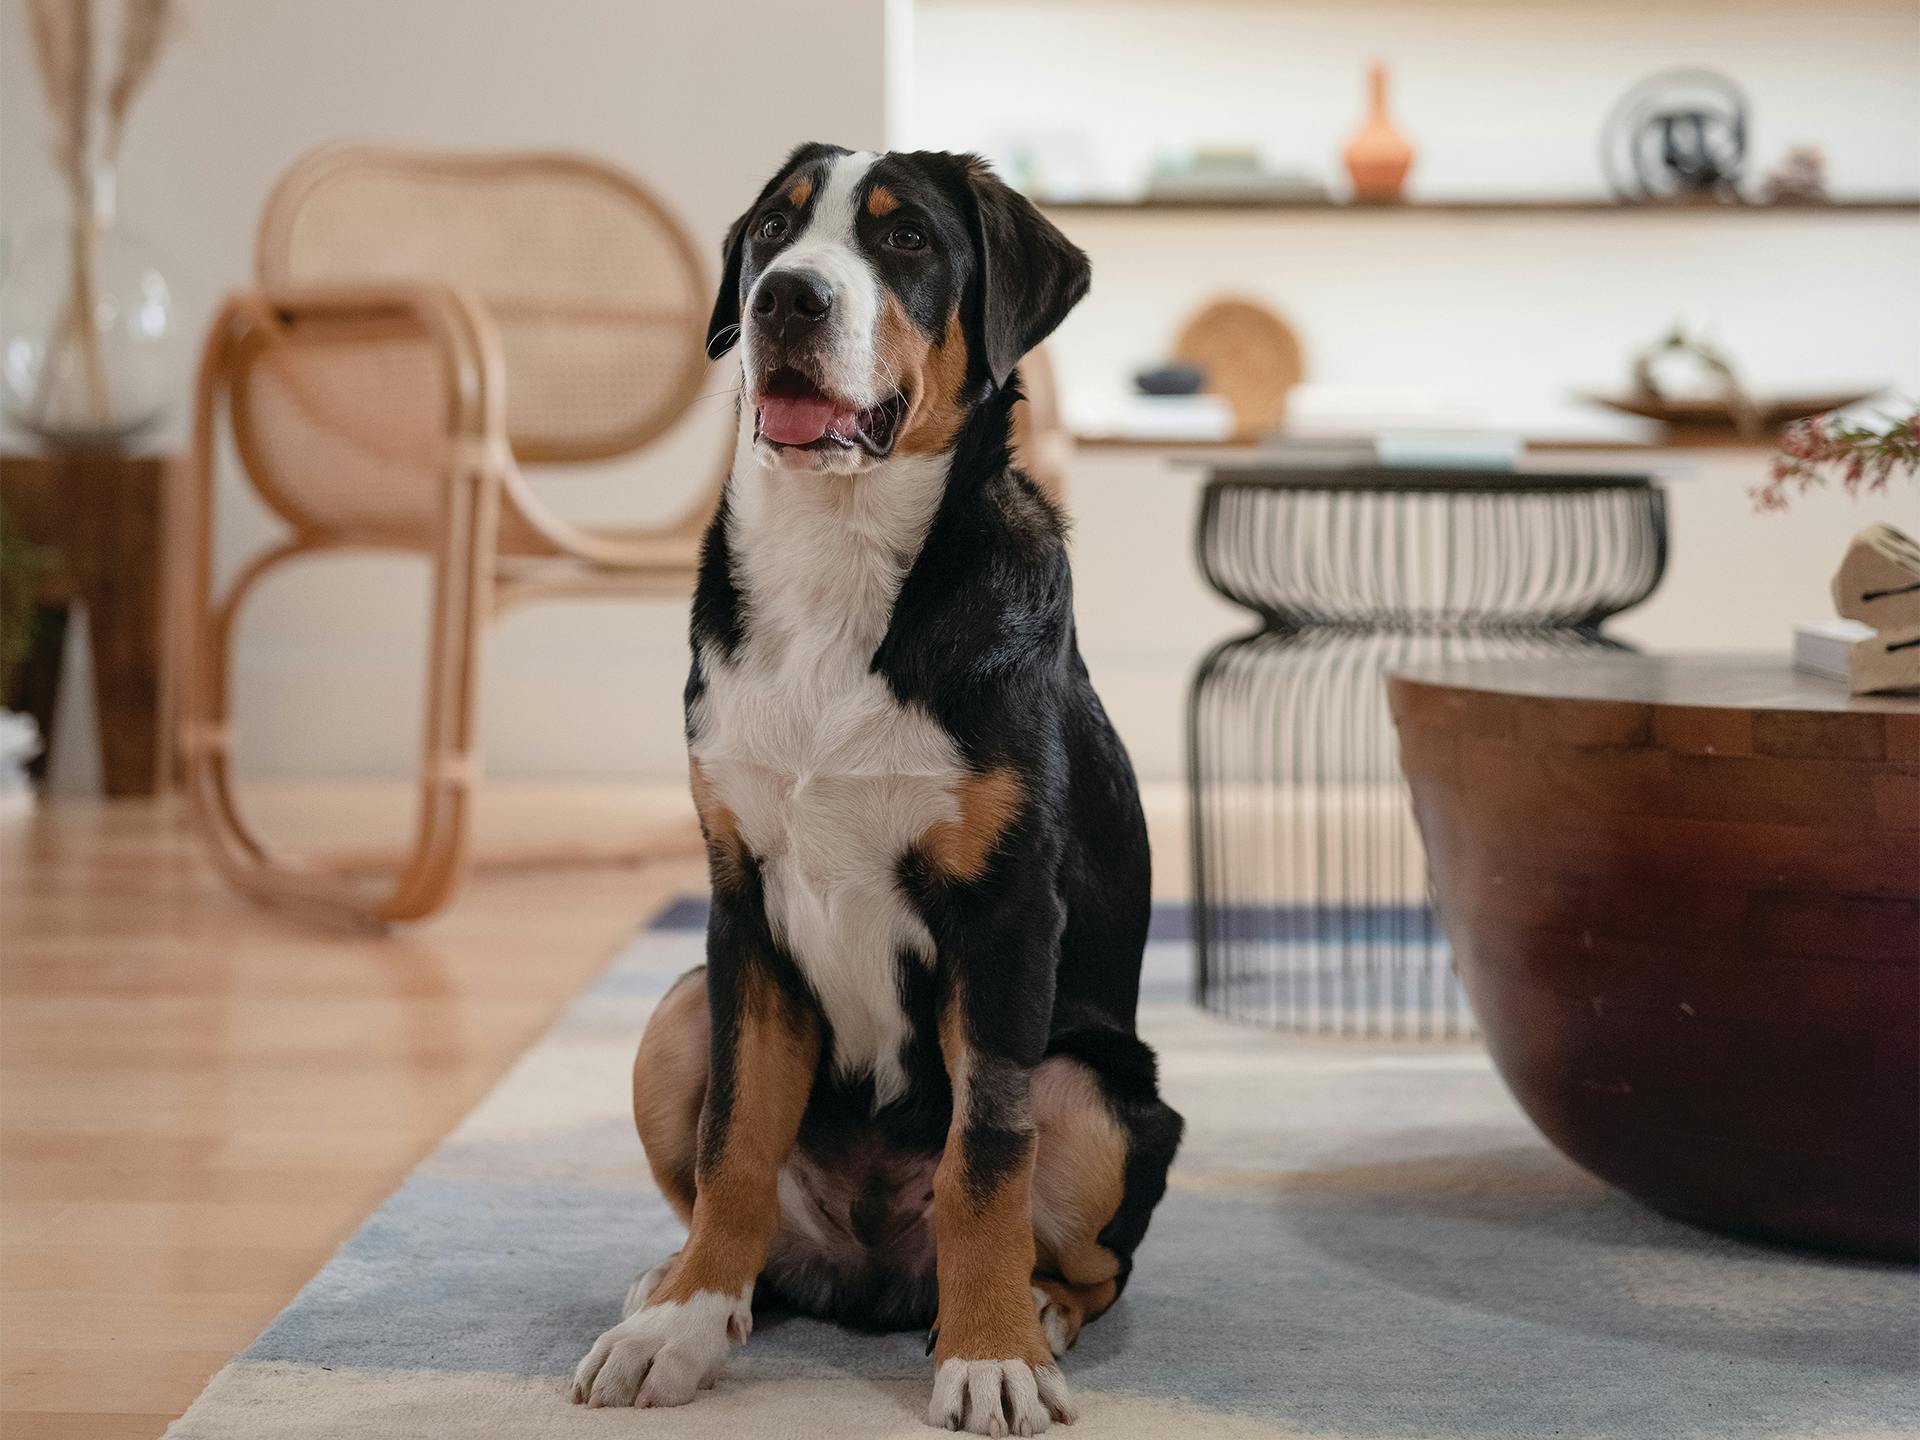 Lifestyle image of a living room with a dog sitting in the room on the rug with 